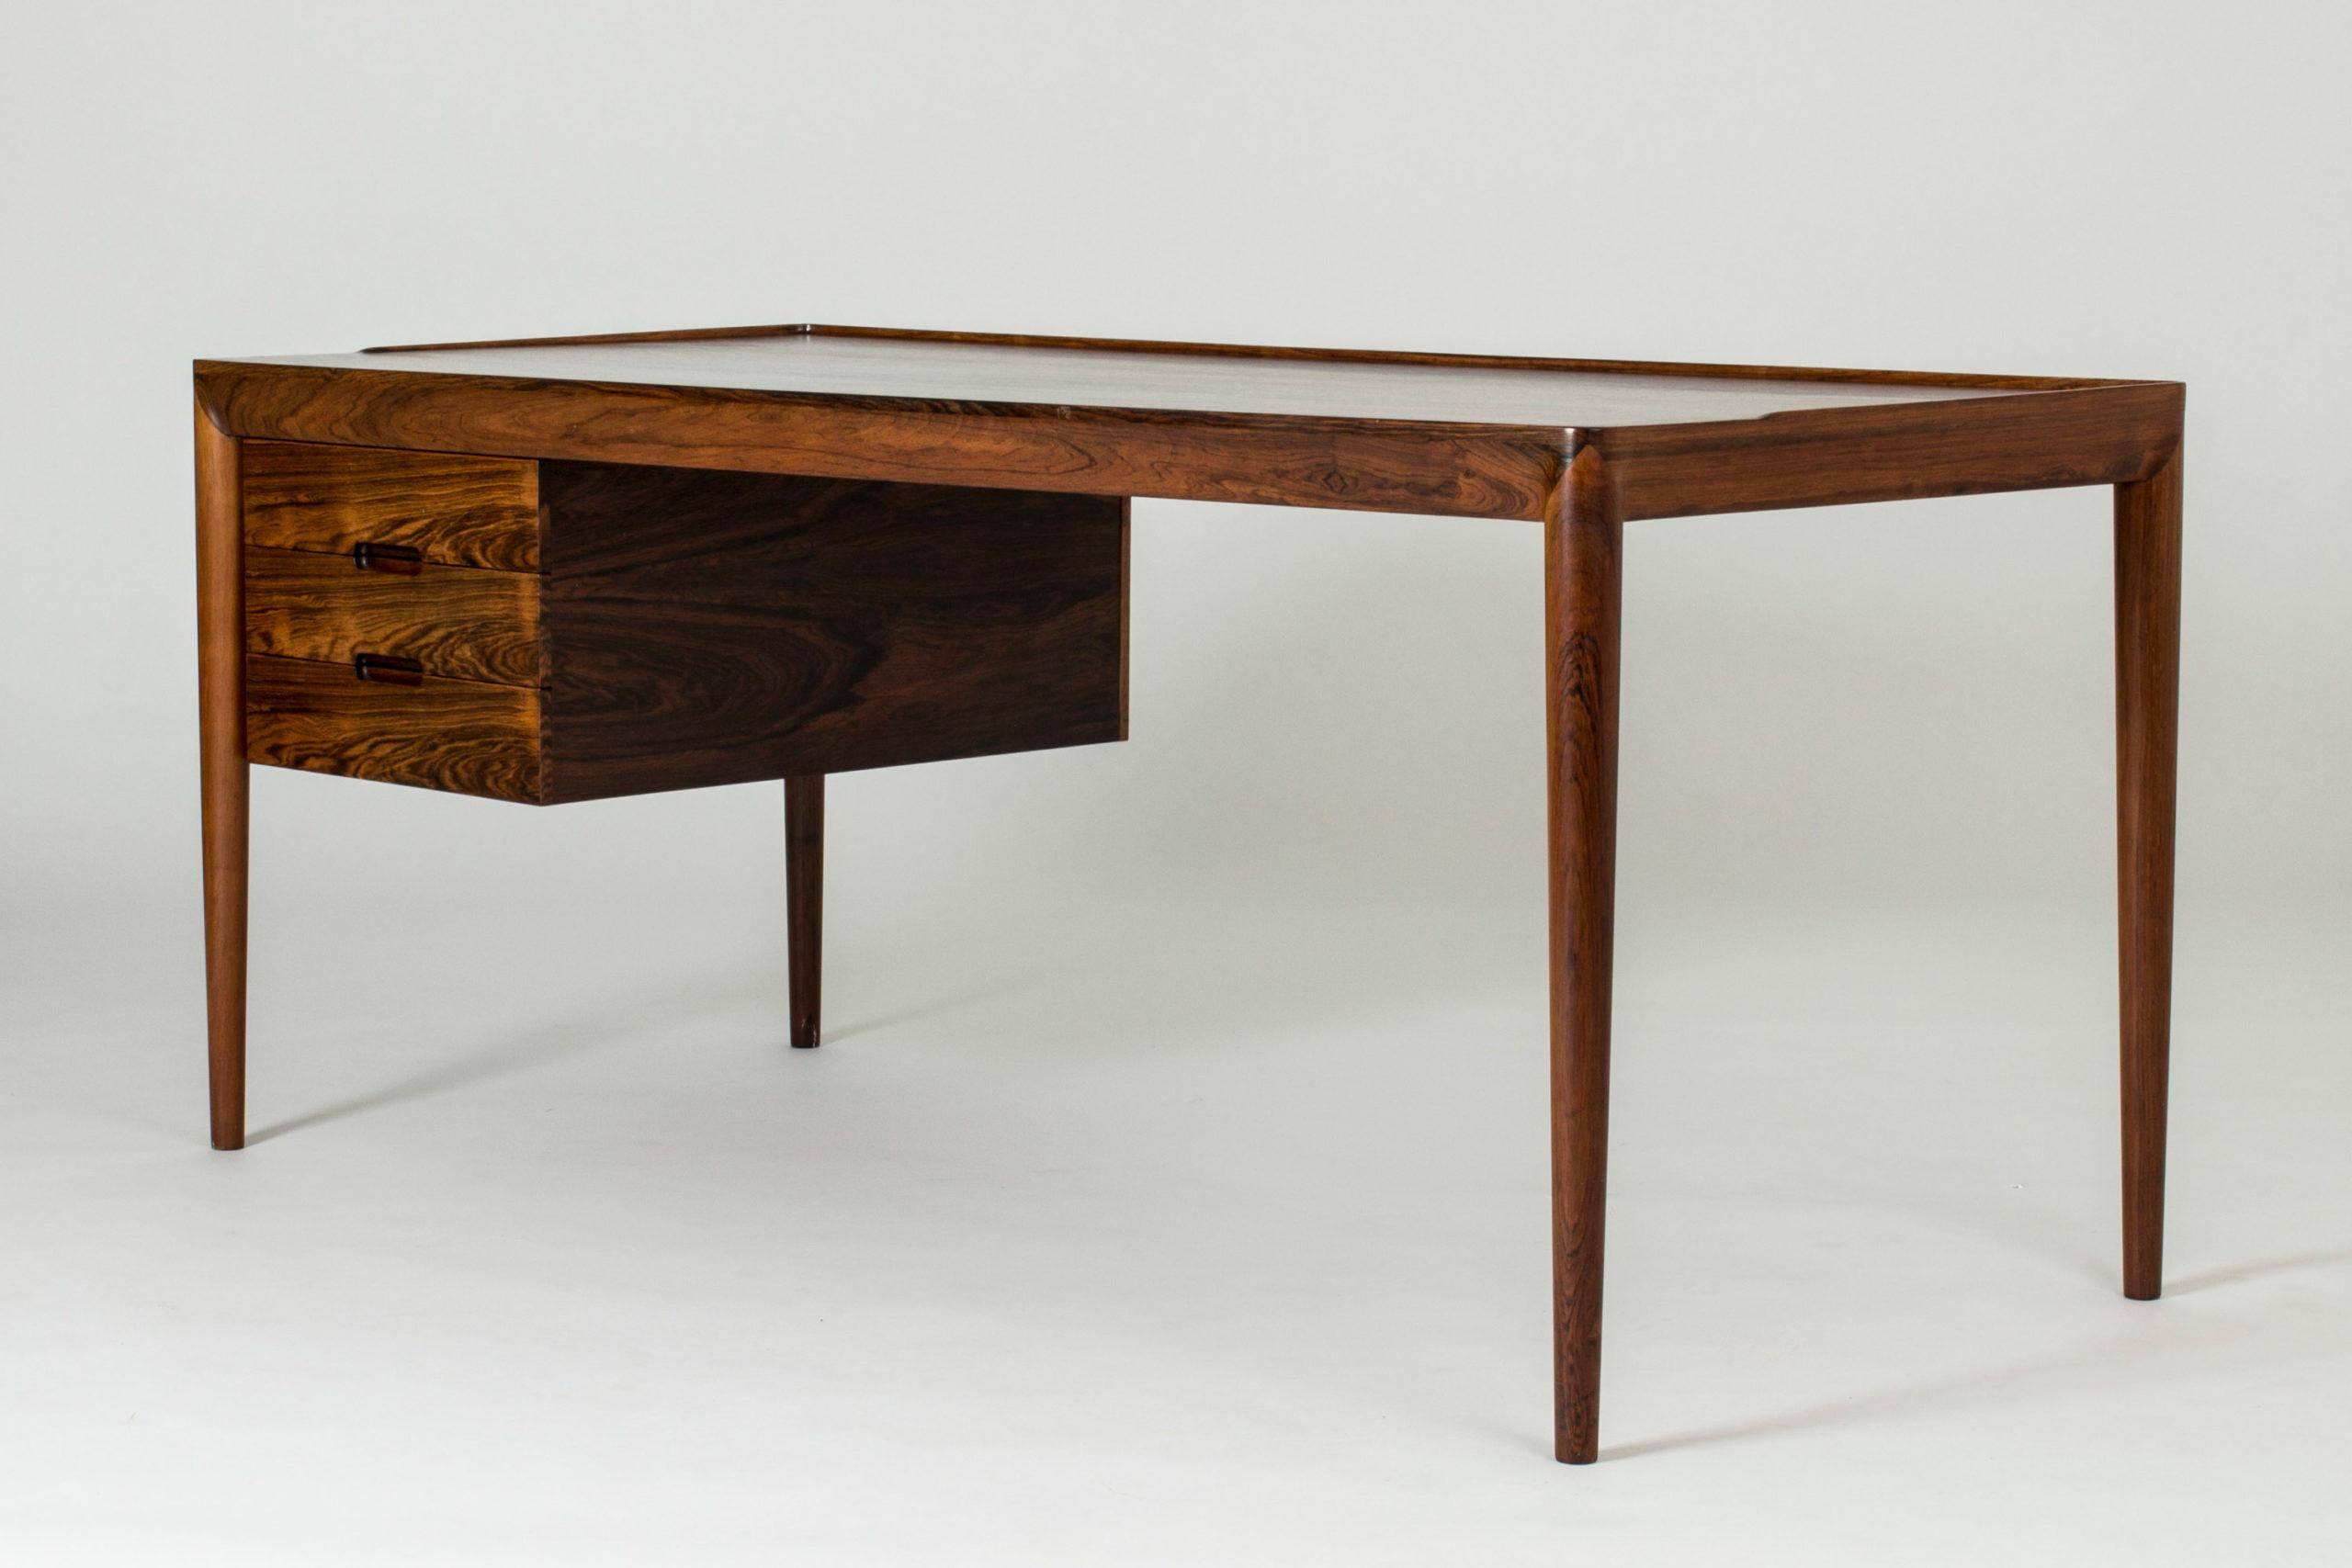 Rosewood desk by Erik Riisager Hansen in a very elegant and sleek design with nice details. Beautiful wood quality. The top drawer has a tray inside which can be pulled over the drawer and serve as a side extension.